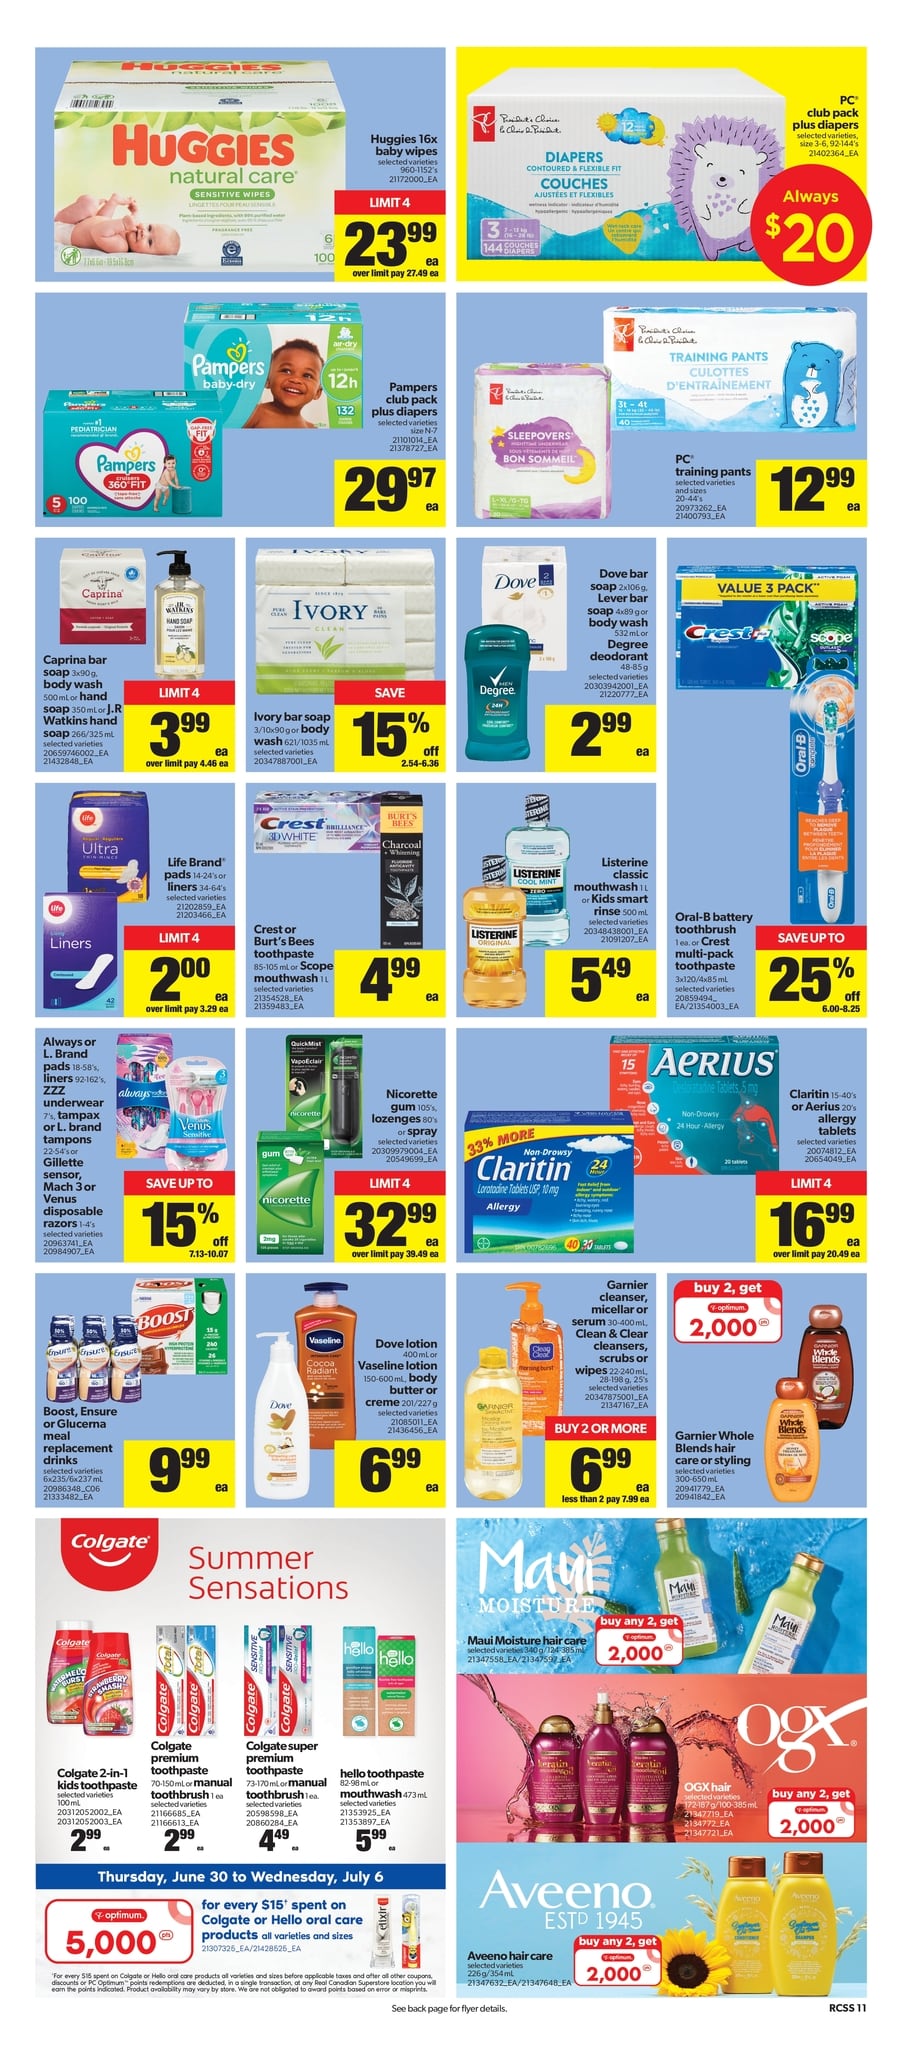 Real Canadian Superstore Ontario - Weekly Flyer Specials - Page 12